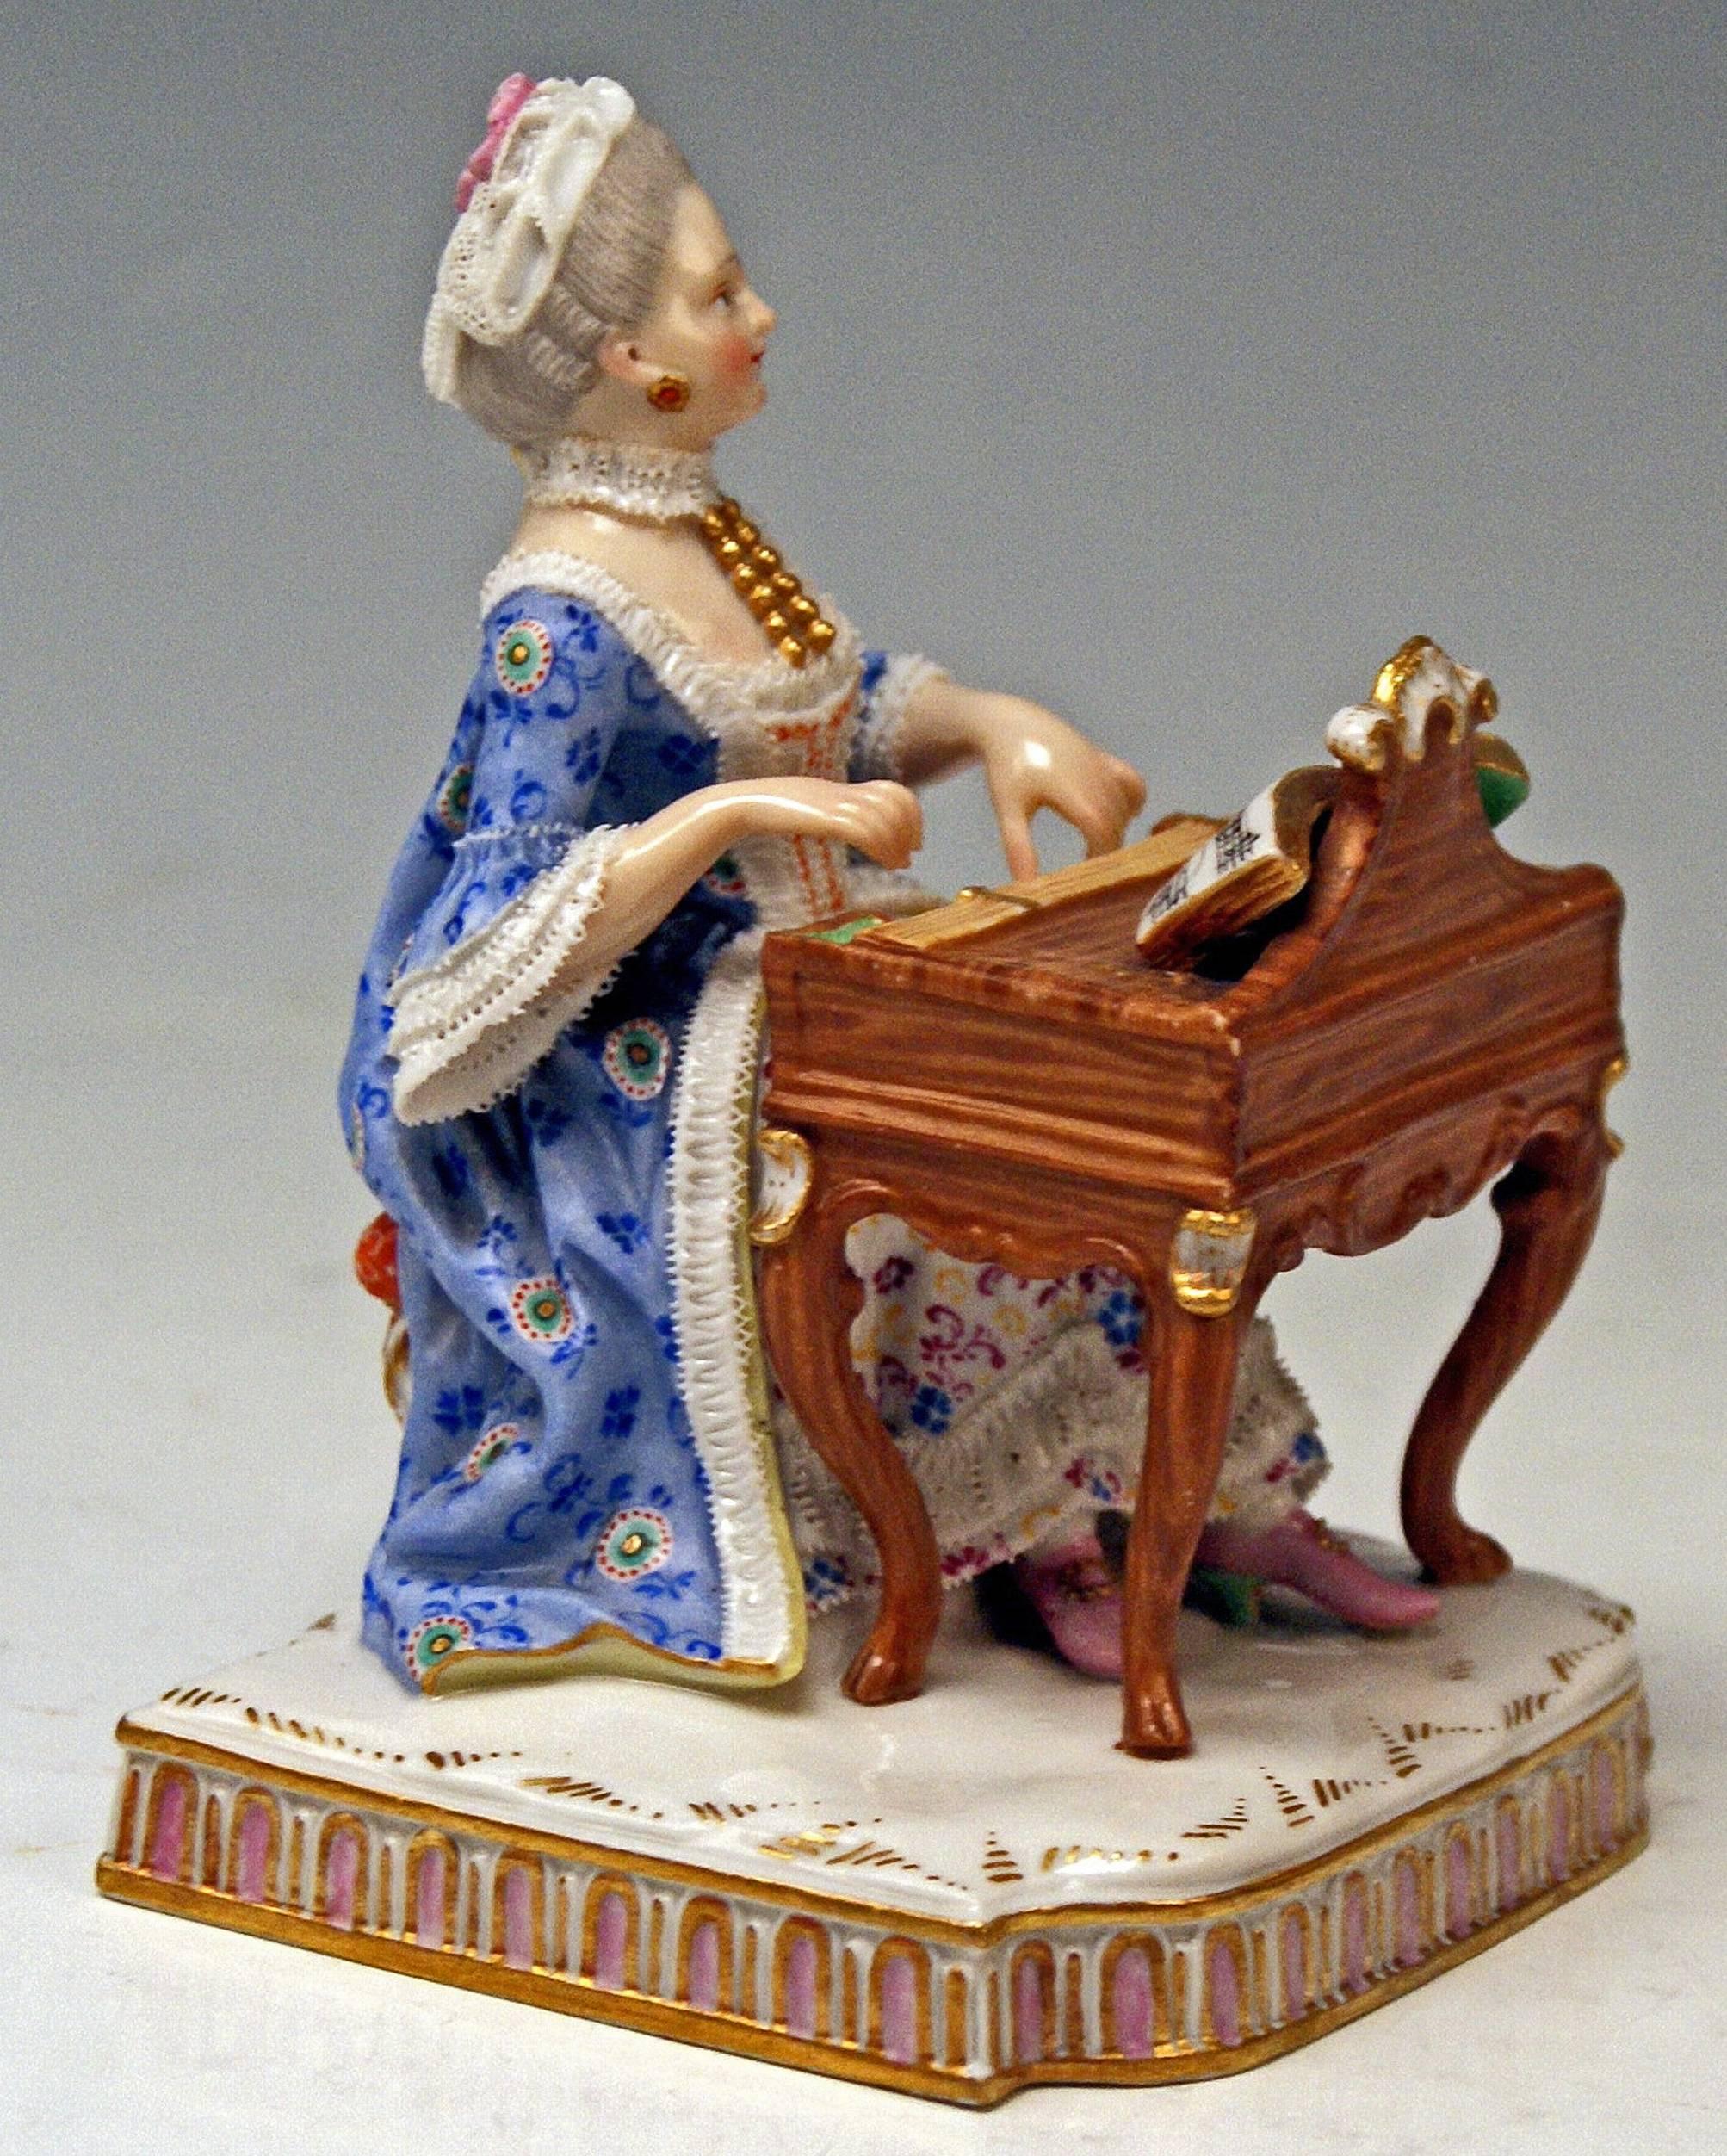 Meissen lovely figurine deriving from the series of five senses:
°E1 The Hearing

Measures / dimensions:
Height 12.0 cm (4.72 inches) 
measures of base:
9.0 x 8.0 cm (3.54 x 3.14 inches) 

Manufactory: Meissen
Hallmarked: Blue Meissen Sword